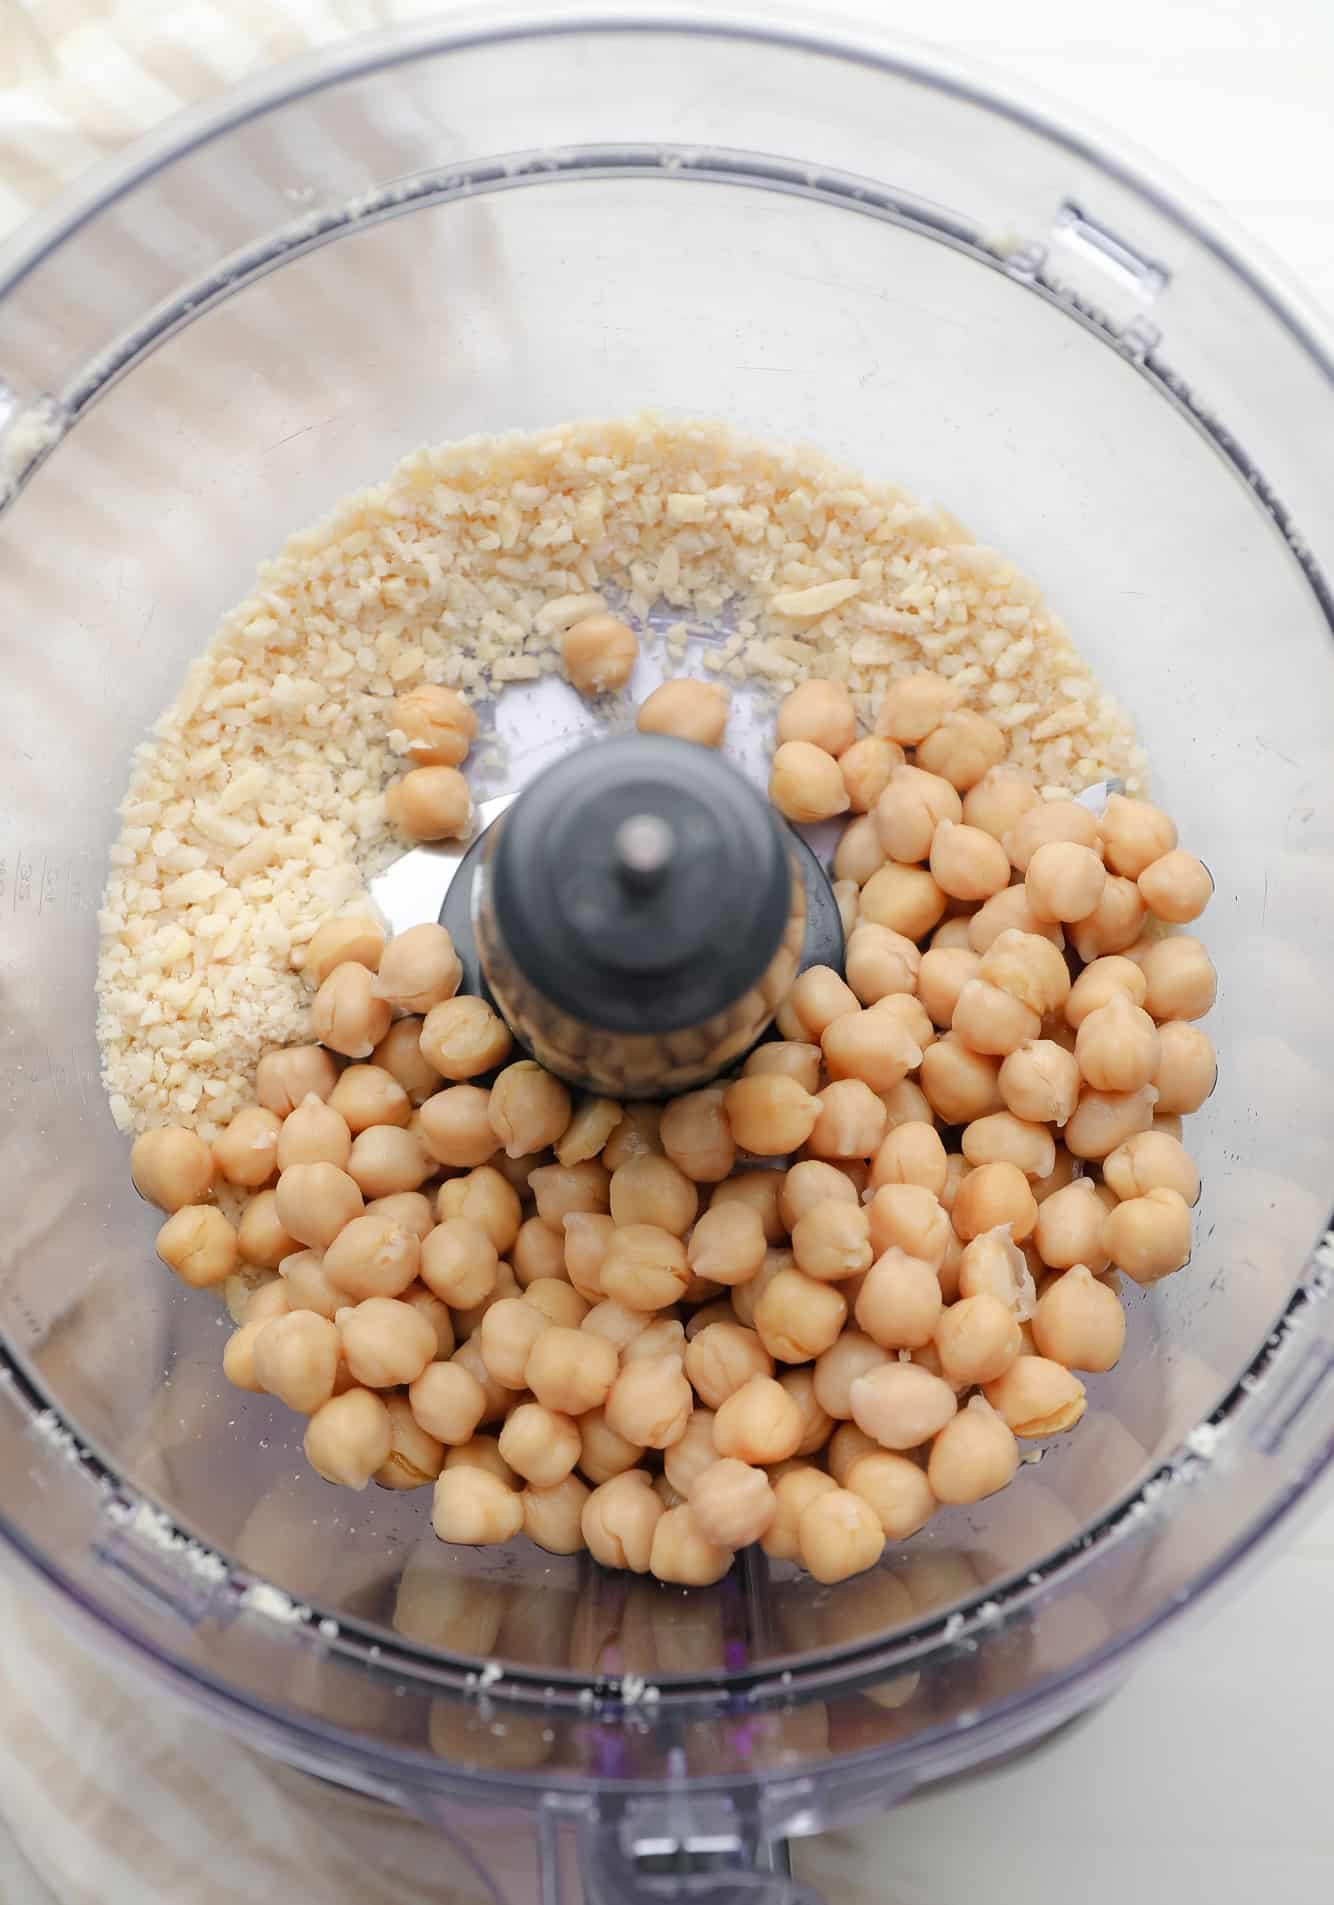 chickpeas and crushed almonds in a food processor.